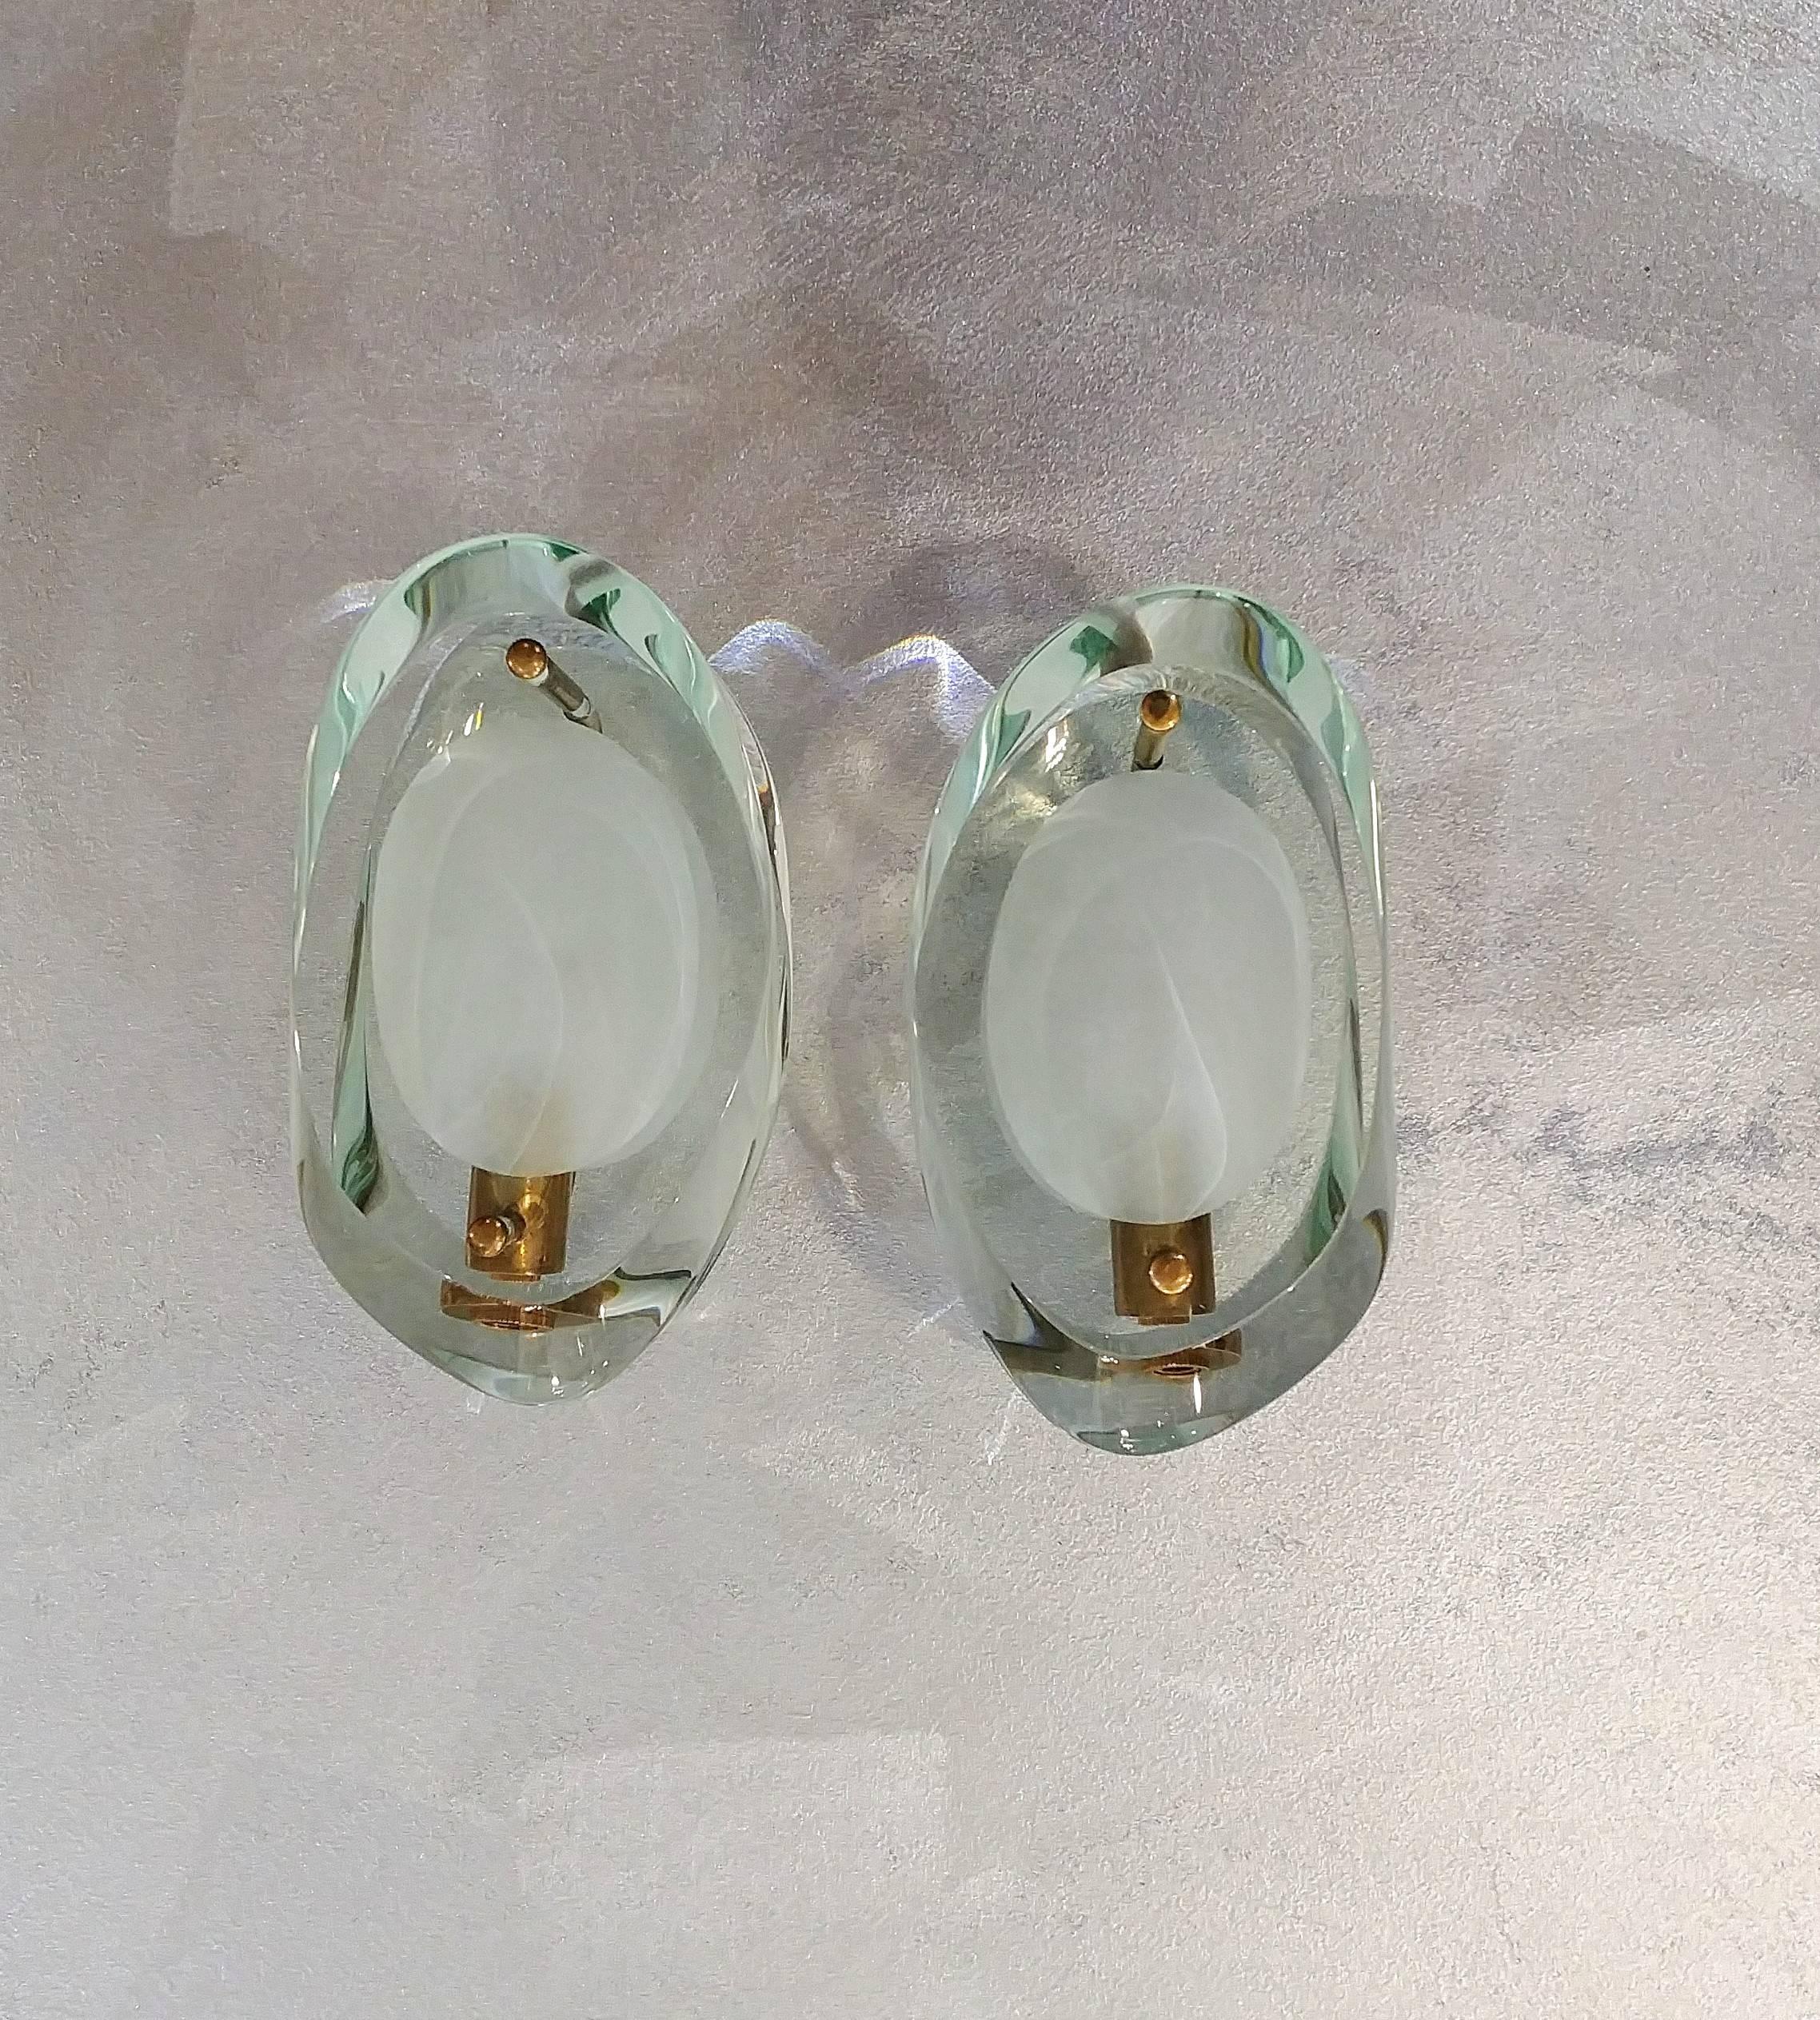 Pair of sconces in the style of Fontana Arte for Max Ingrand.
Material: Nickel plated metal, Murano glass partially engraved.